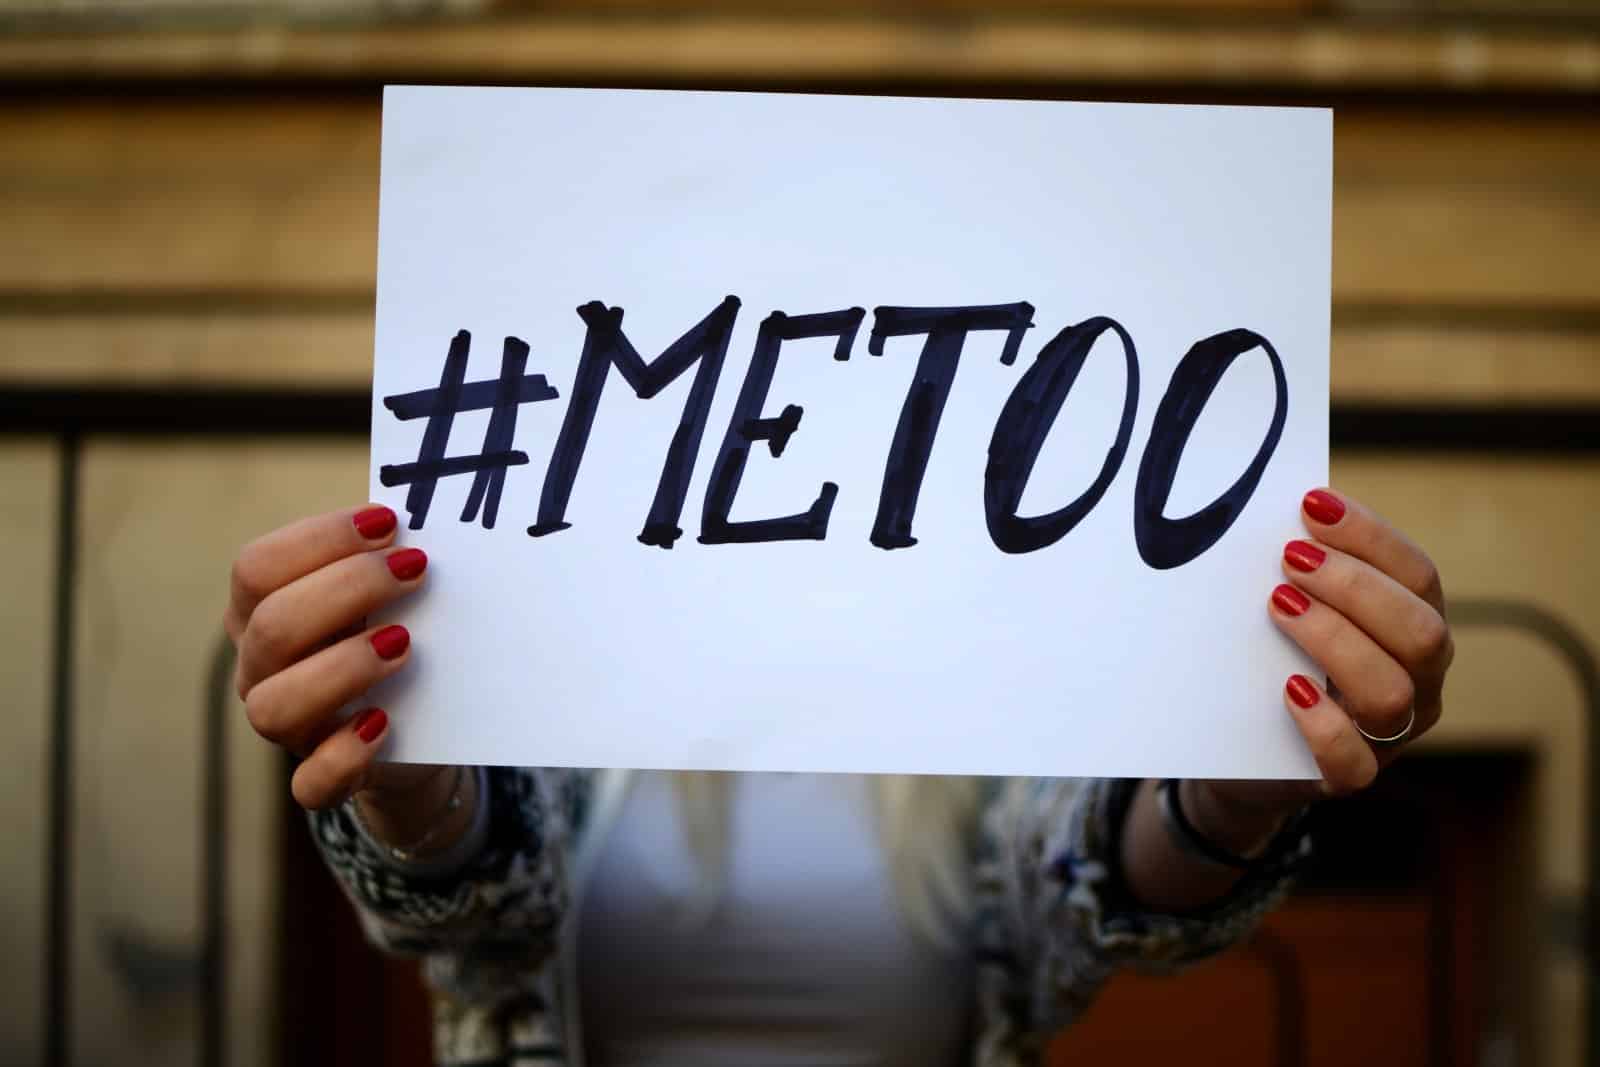 Image Credit: Shutterstock / Mihai Surdu <p><span>The #MeToo movement emerged as a social media campaign to raise awareness about the prevalence of sexual harassment and assault. It sparked a global reckoning with powerful individuals and institutions, igniting conversations about consent, accountability, and systemic misogyny.</span></p>